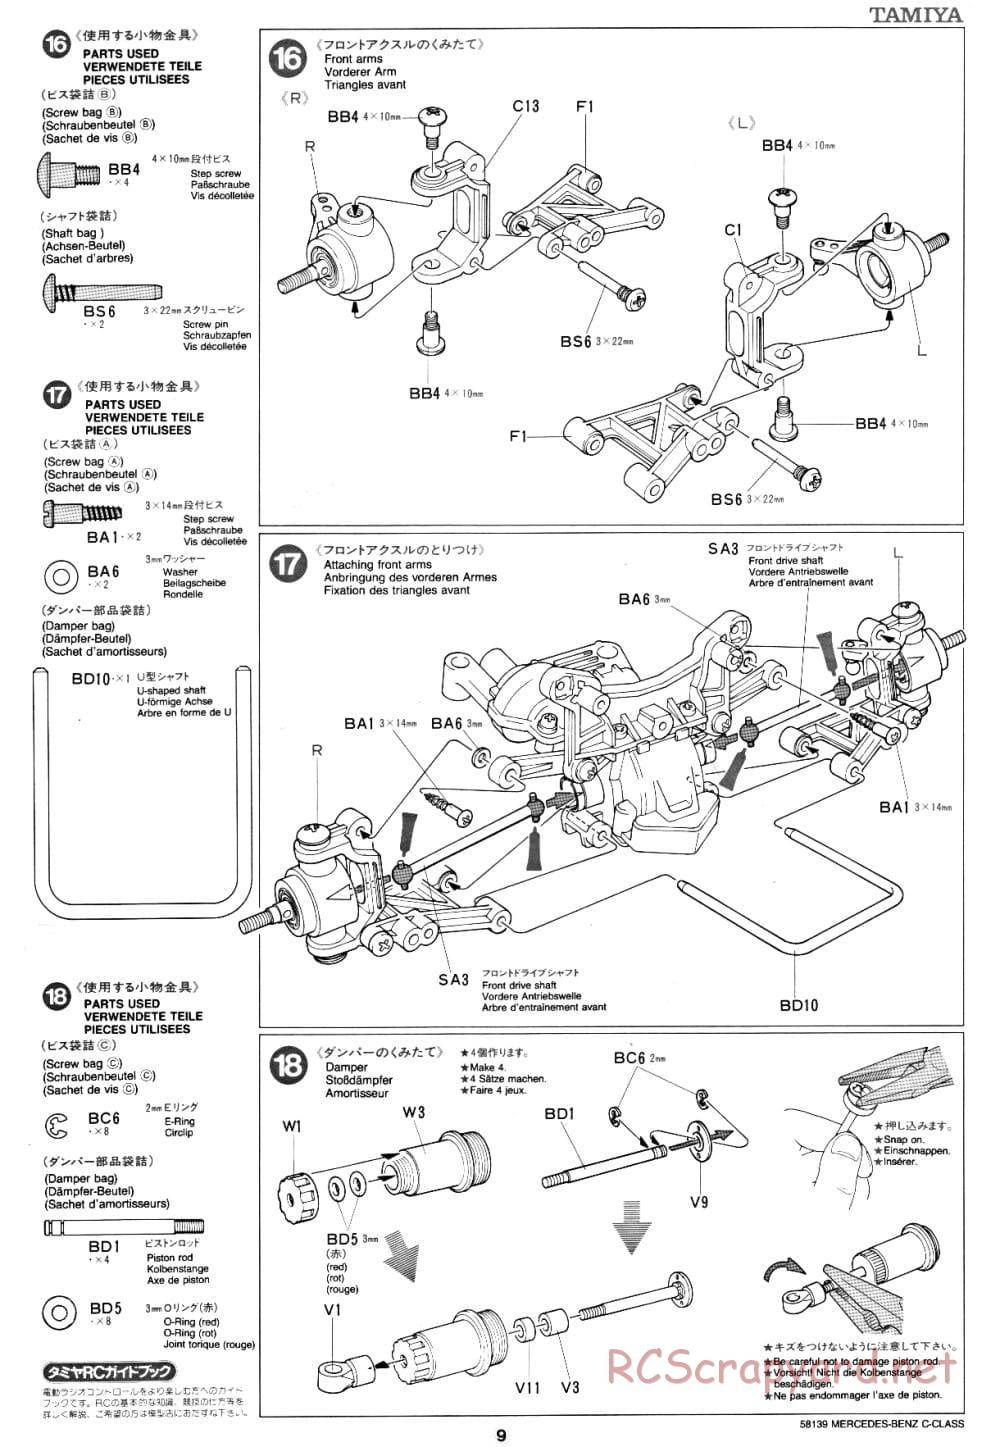 Tamiya - AMG Mercedes-Benz C-Class DTM D2 - TA-02 Chassis - Manual - Page 9